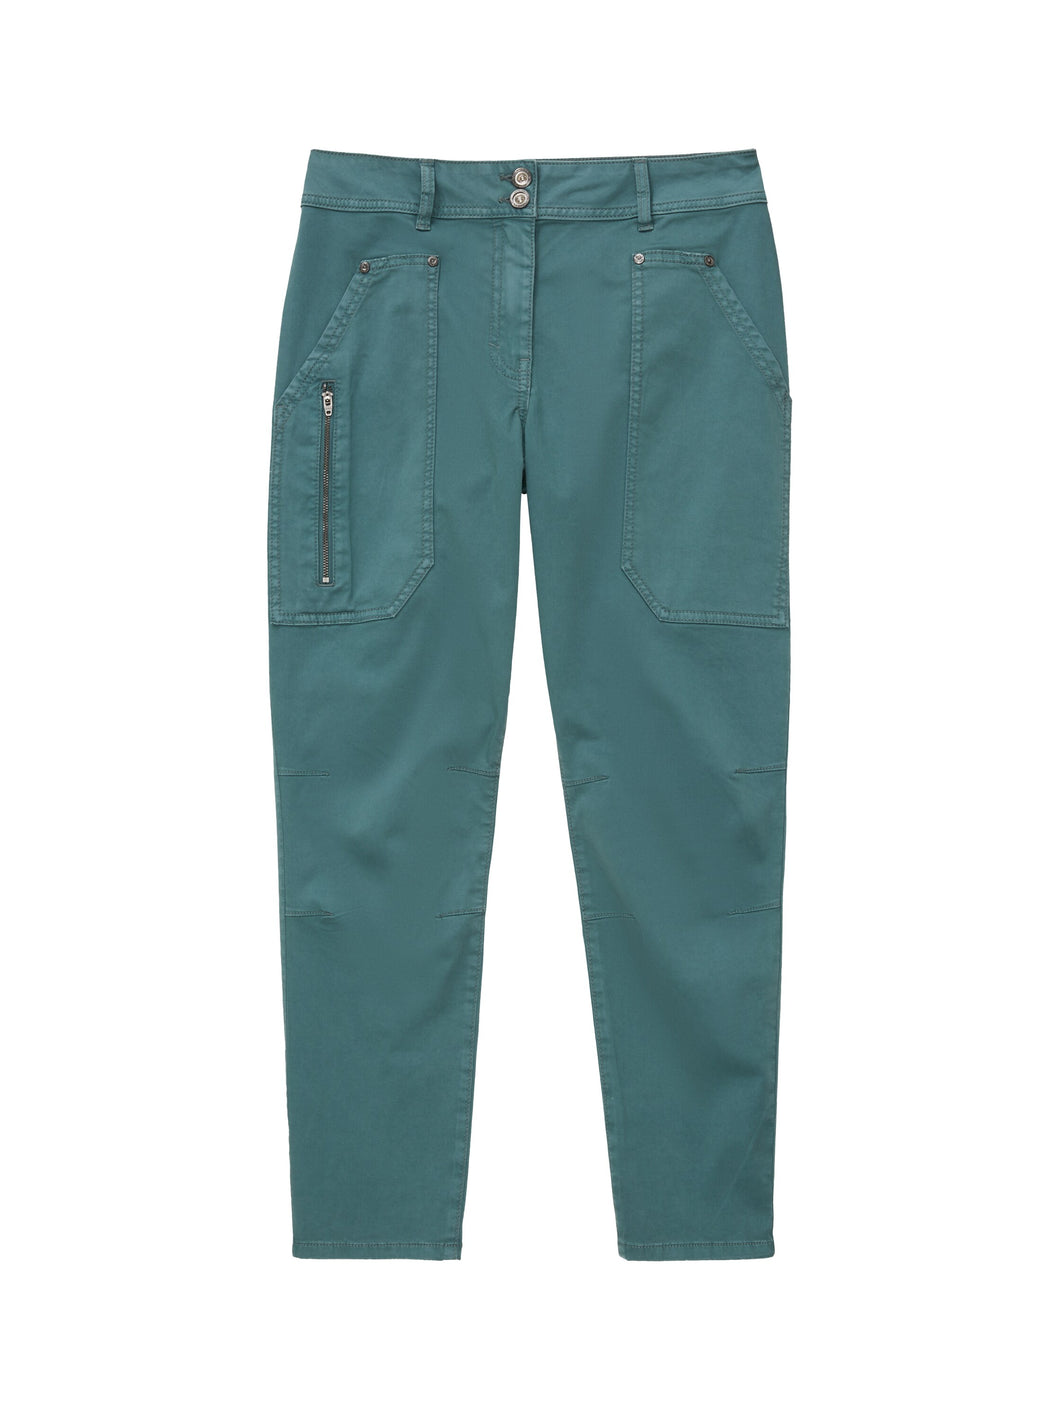 TOM TAILOR SLIM PANTS WITH CARGO DETAILS sea pine green